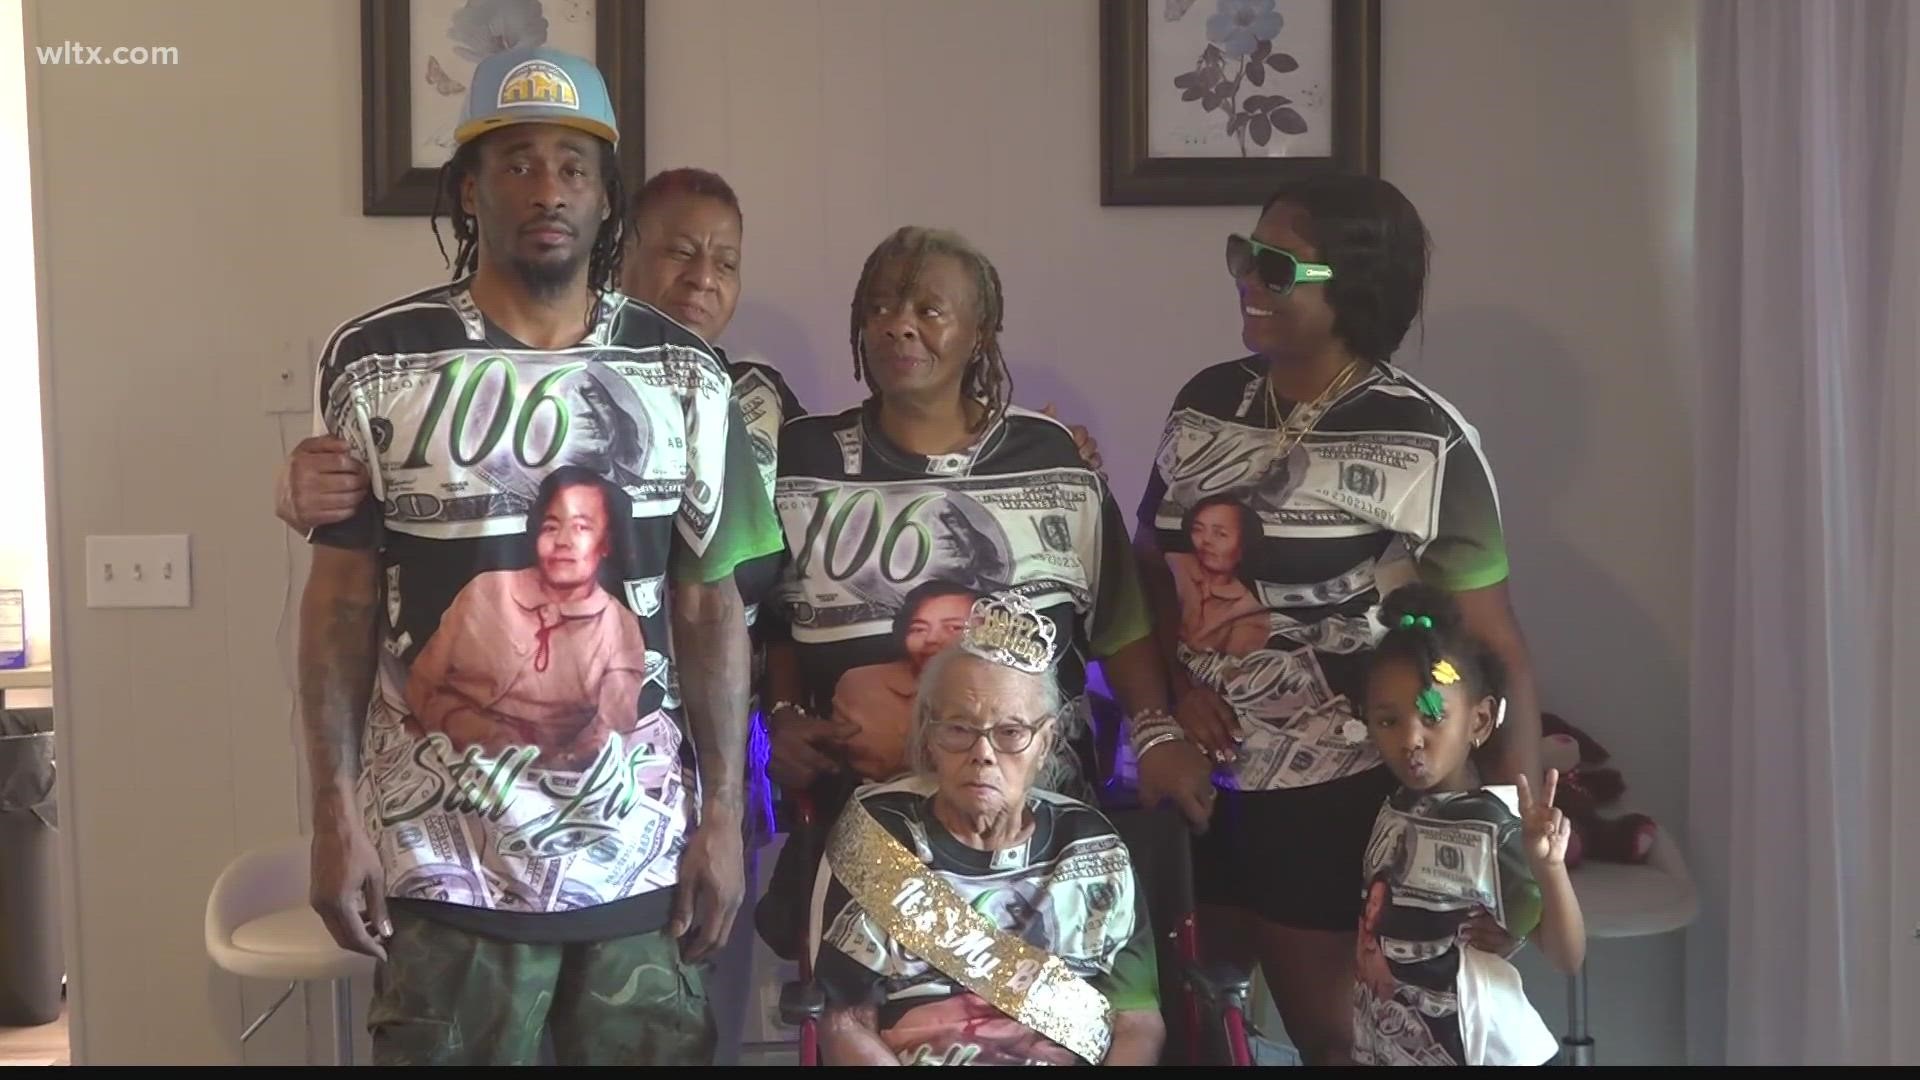 Lecie Worthy spent her 106th birthday with family during a special celebration.